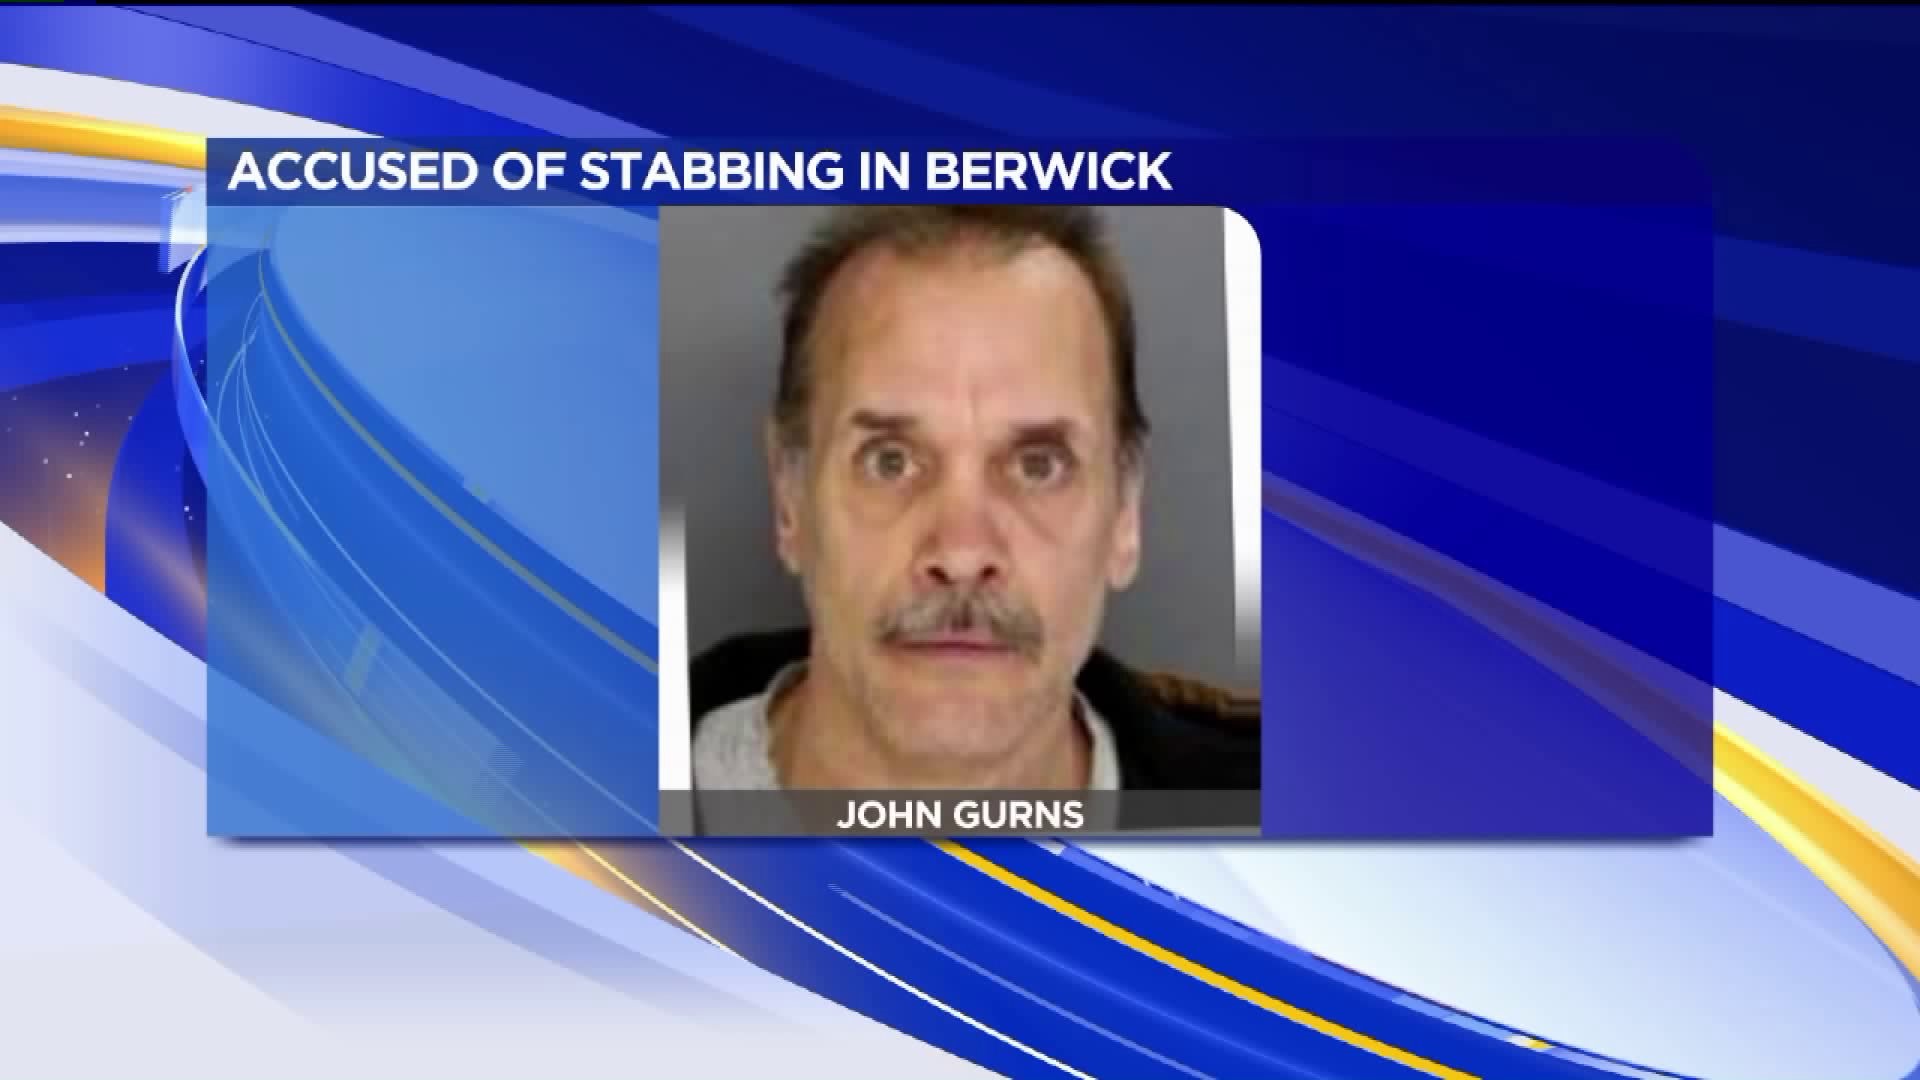 Man Charged With Stabbing in Berwick